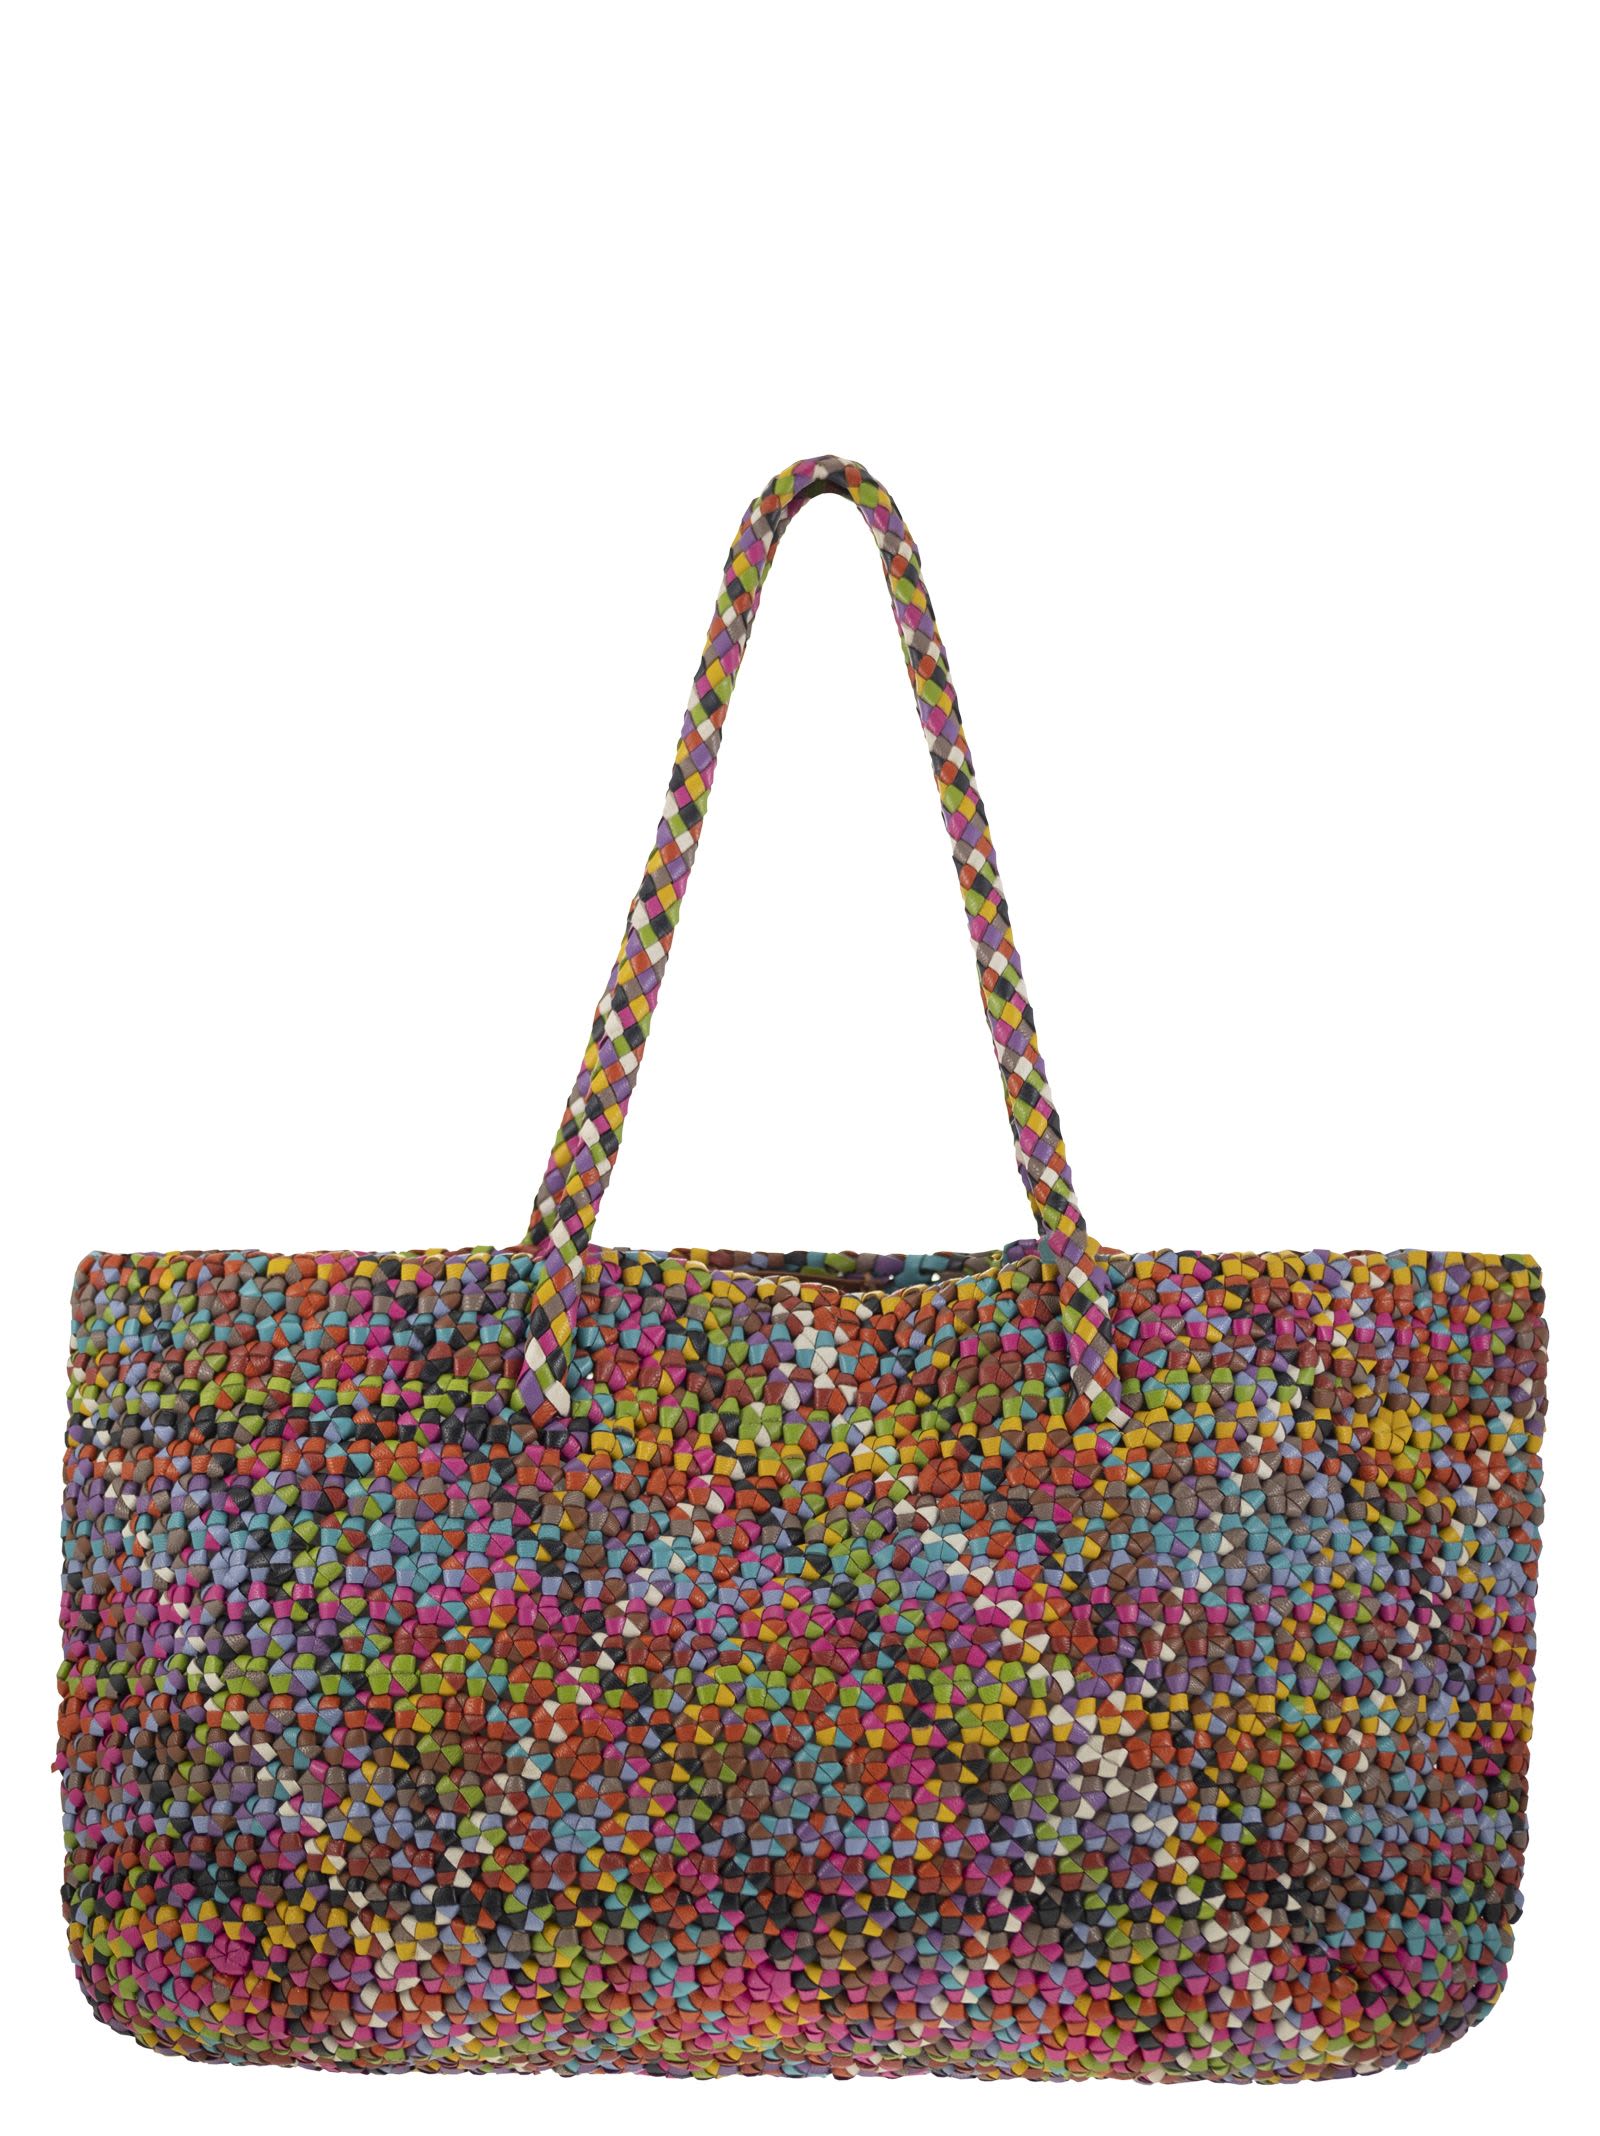 Octo - Woven Leather Bag